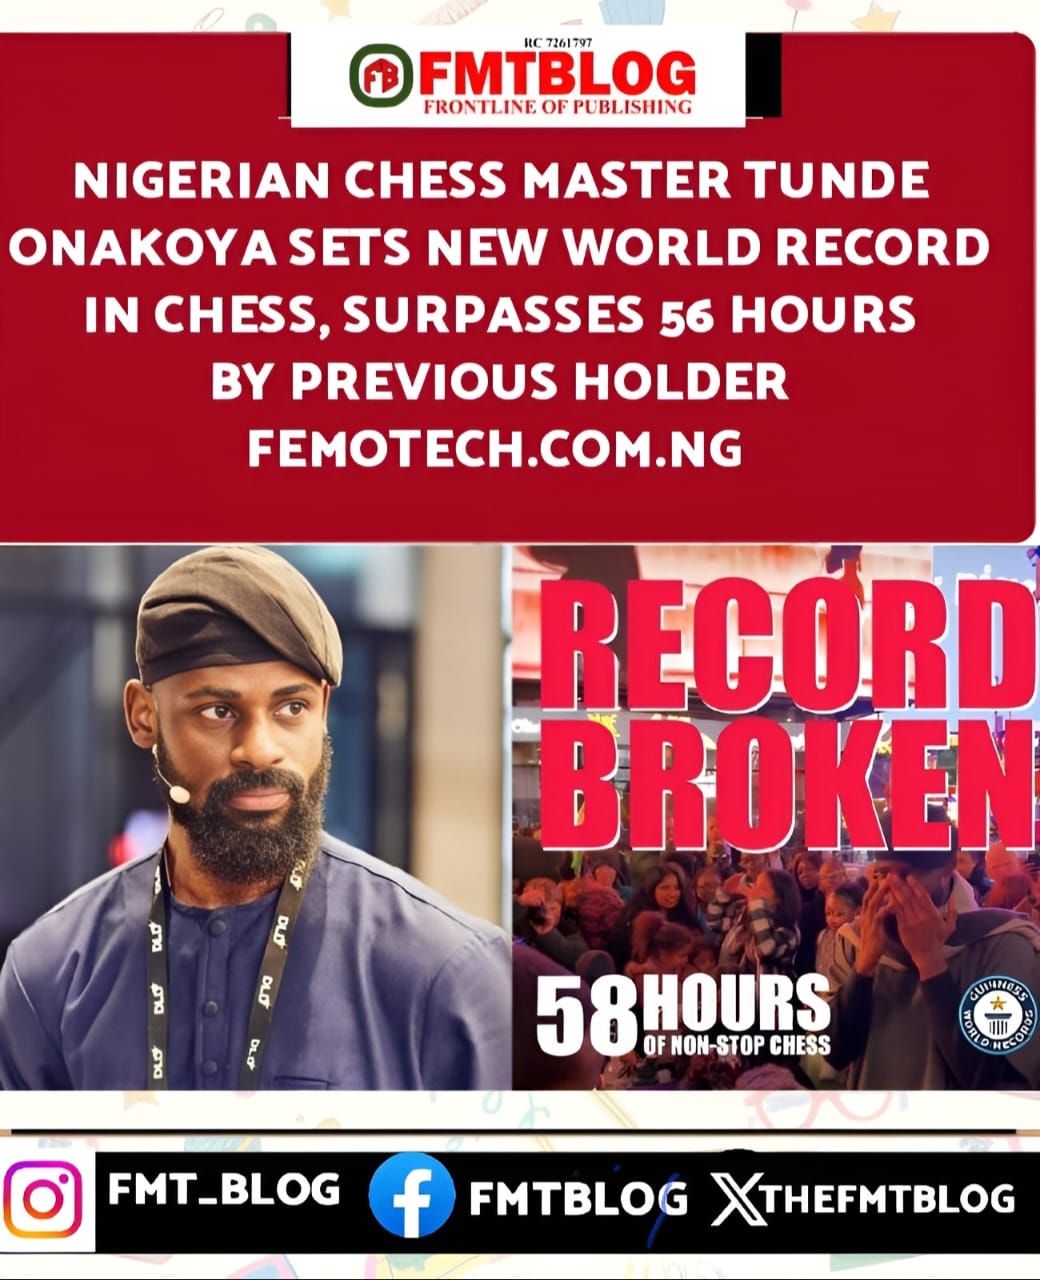 Nigerian Chess Master Tunde Onakoya Sets New World Record In Chess, Surpasses 56 Hours By Previous Holder (VIDEO)